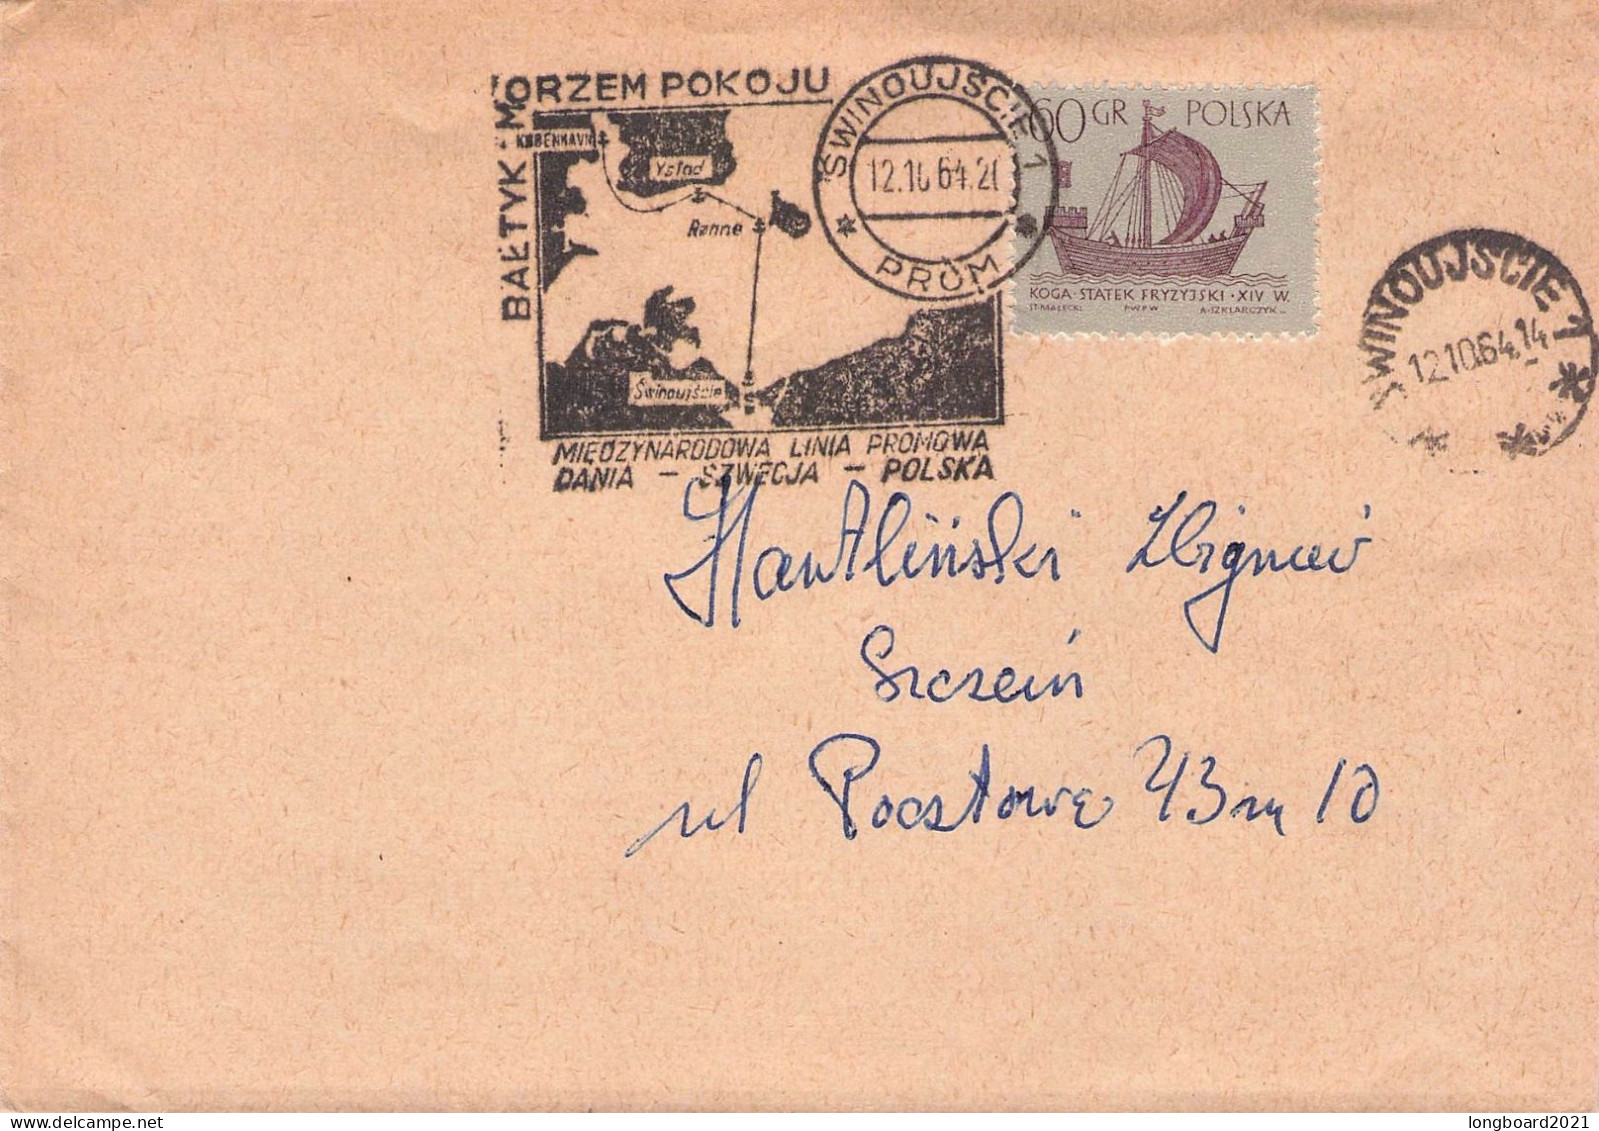 POLAND - SPECIAL CANCELLATION SWINOUJSCIE -FERRY- 1964  / 7018 - Lettres & Documents